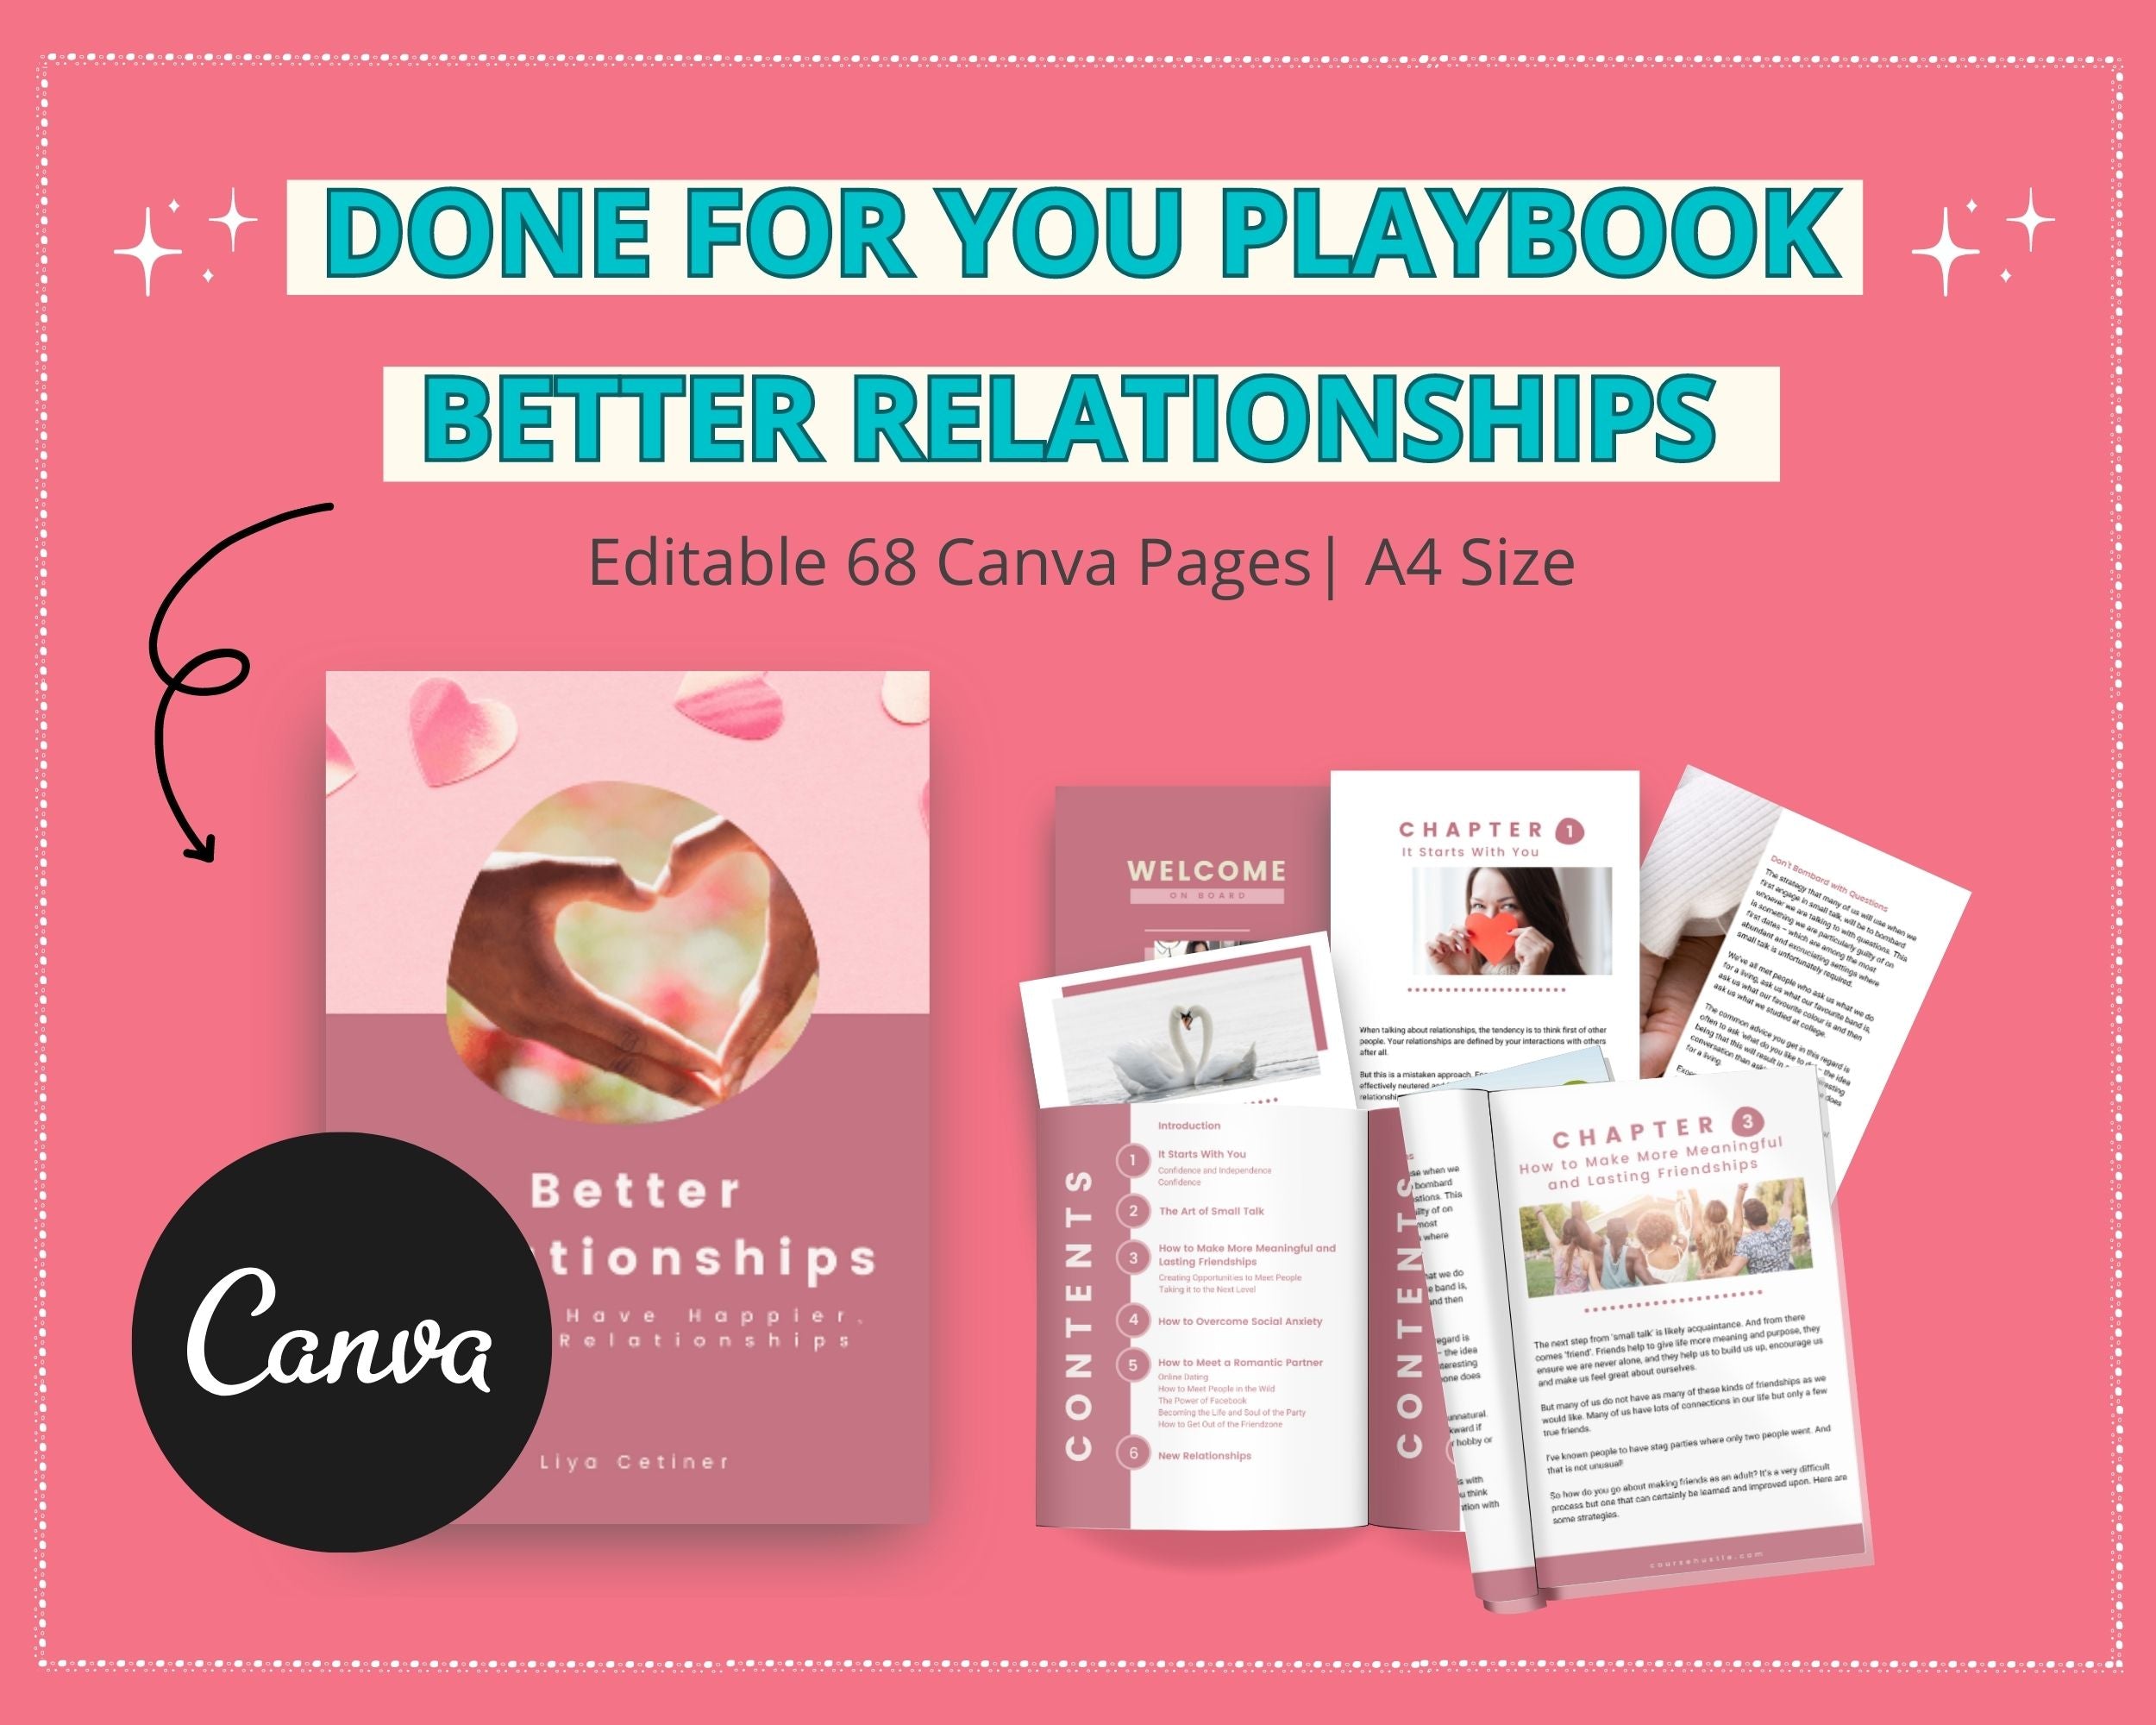 Done for You Better Relationship Playbook in Canva